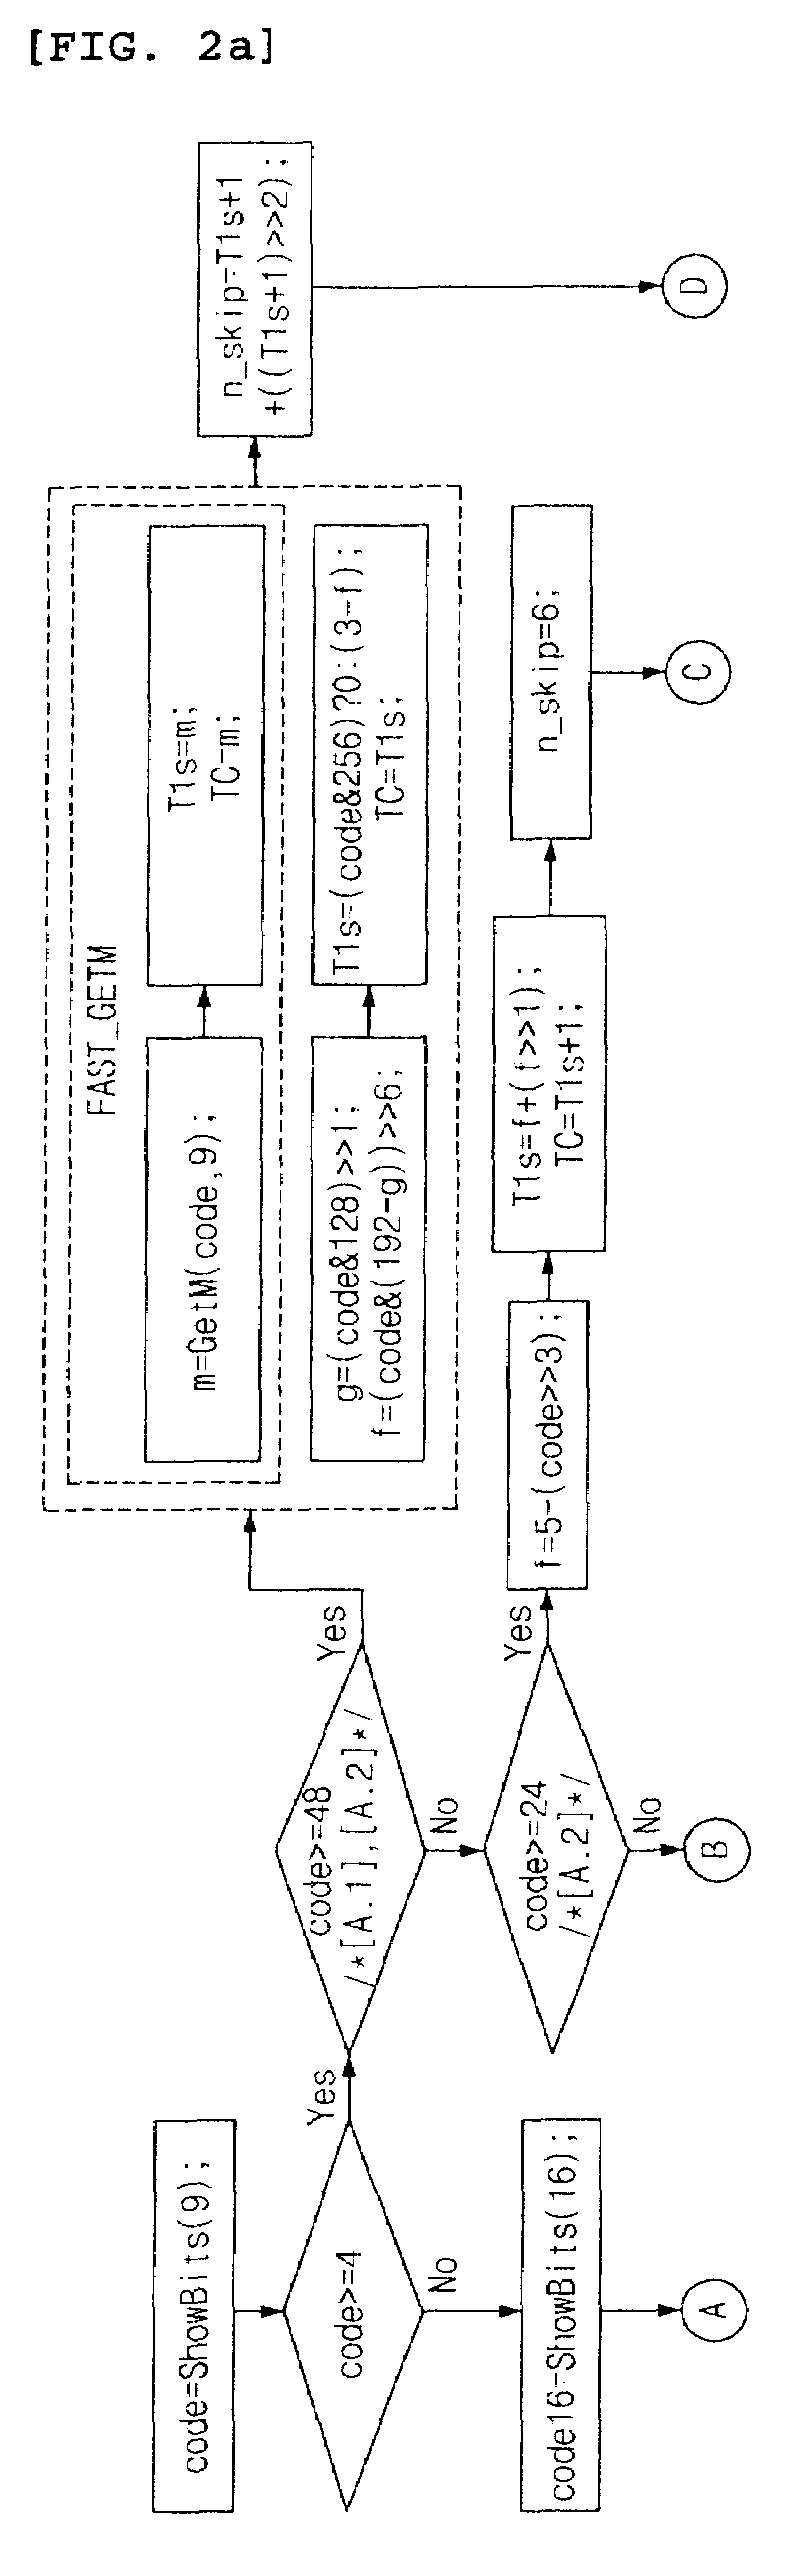 Effective decoding method of h.264/avc context-based adaptive variable length coding